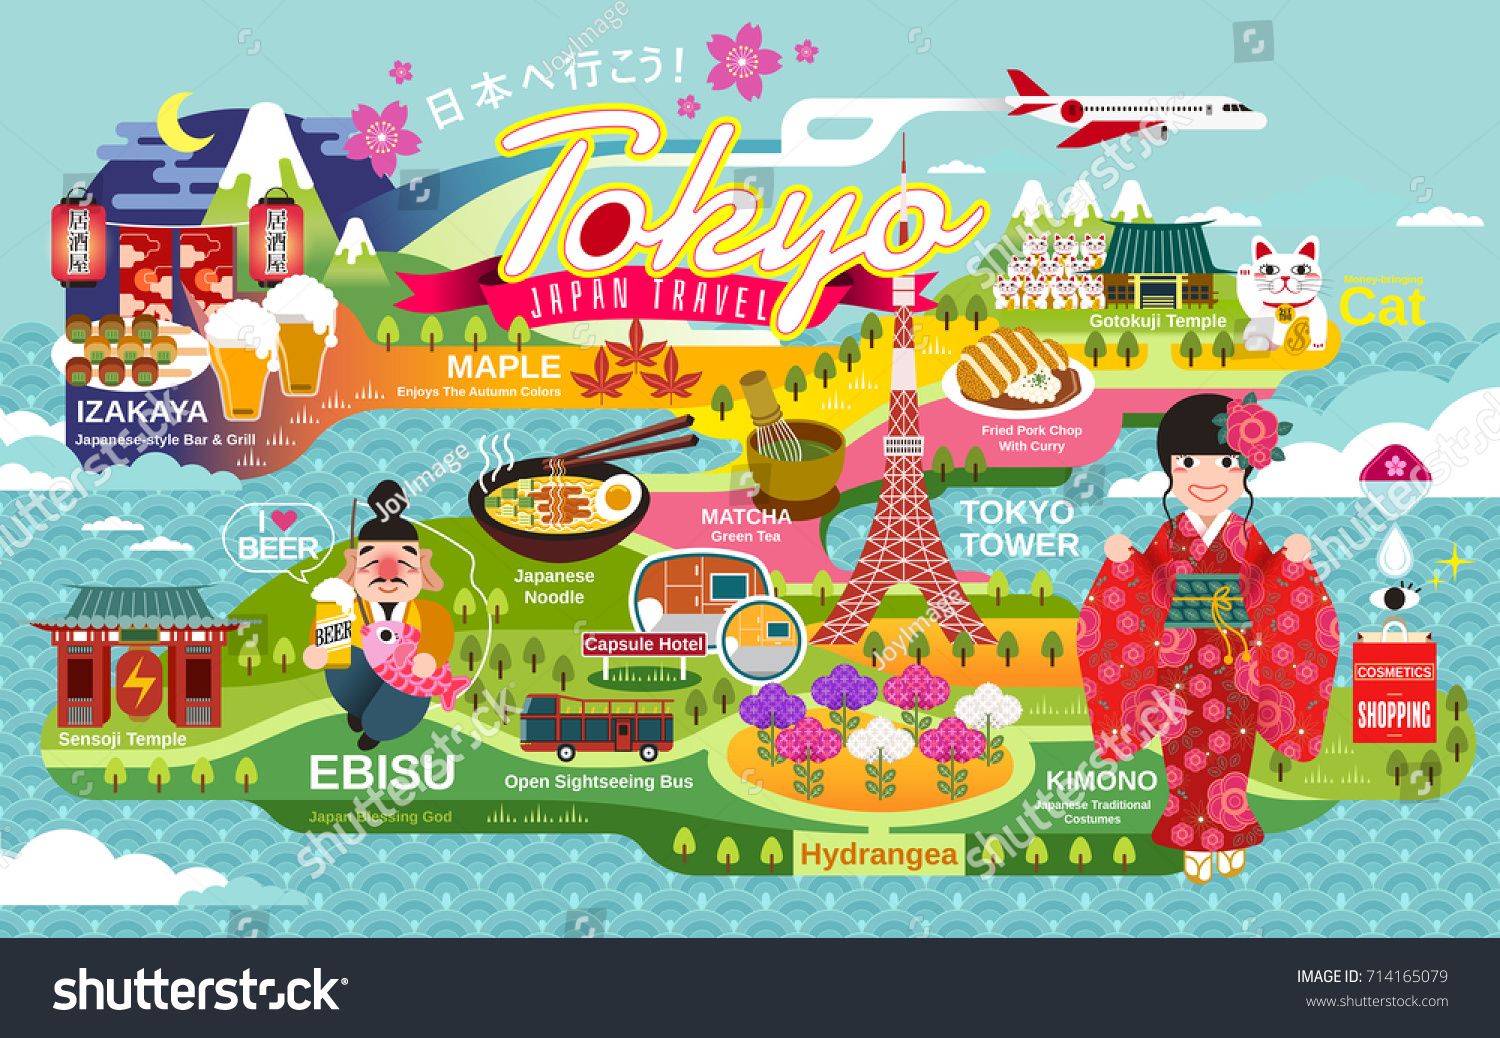 Japan Travel Poster Tokyo Attractions Traditional Stock Vector Royalty Free